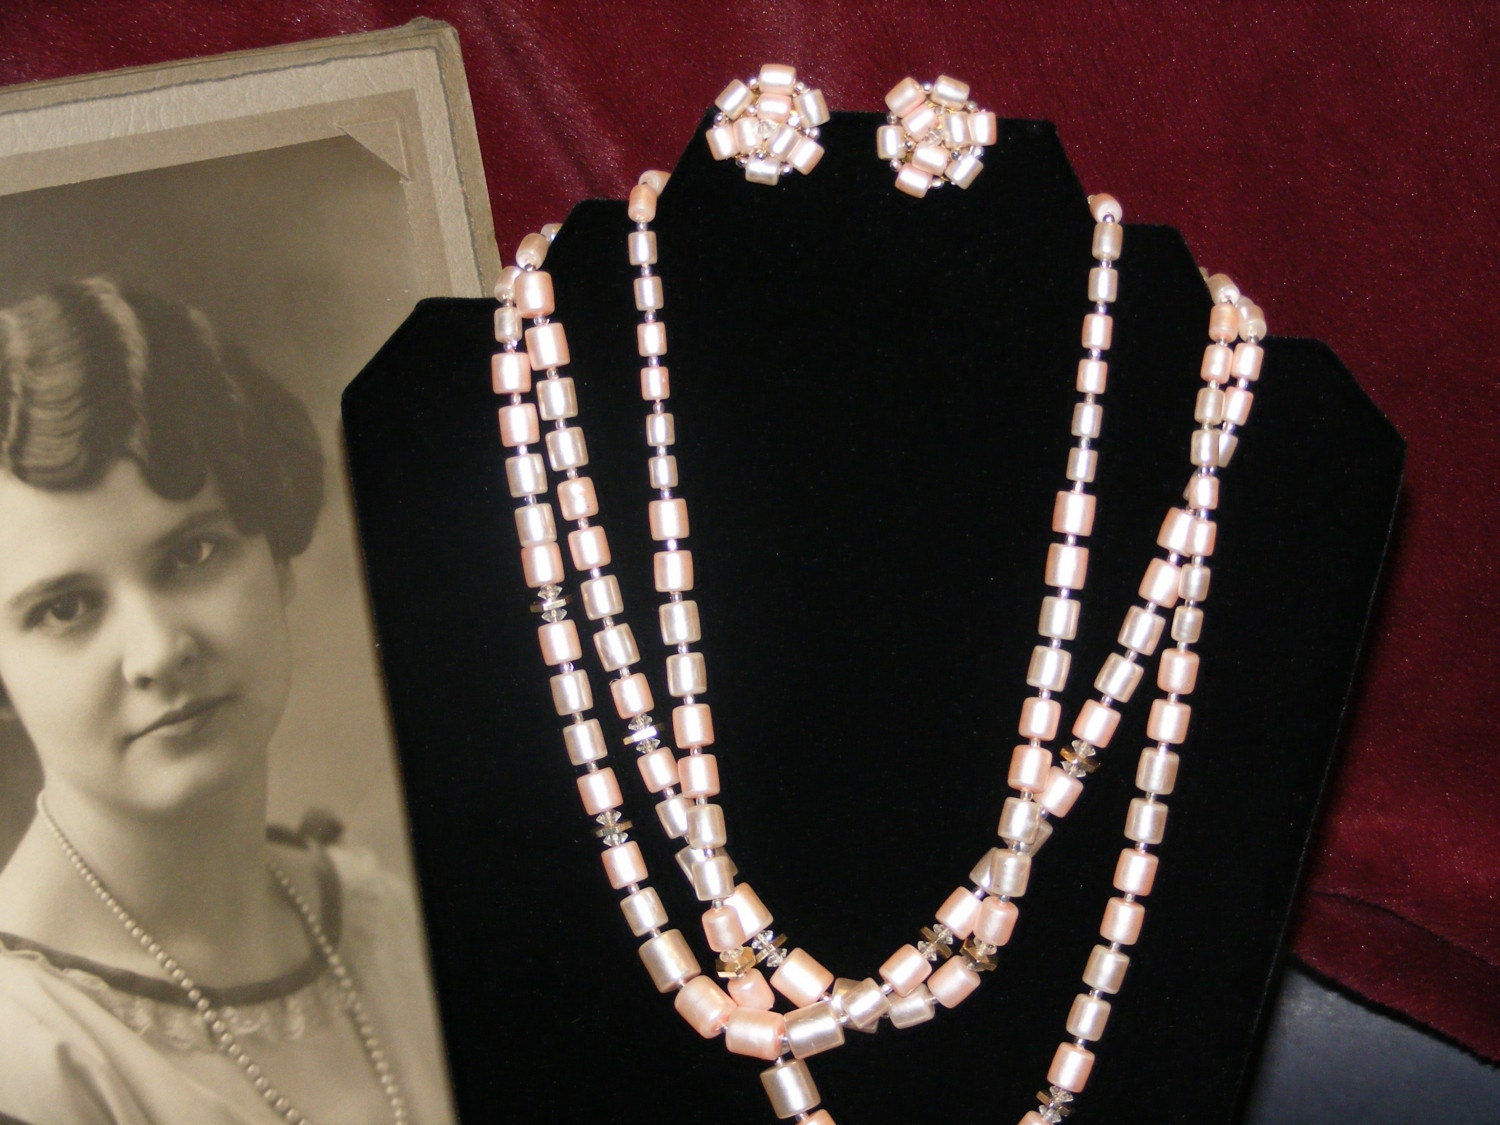 Auntie MADELEINE's Vintage Jewelry Rose Pink Bead Necklace and earrings